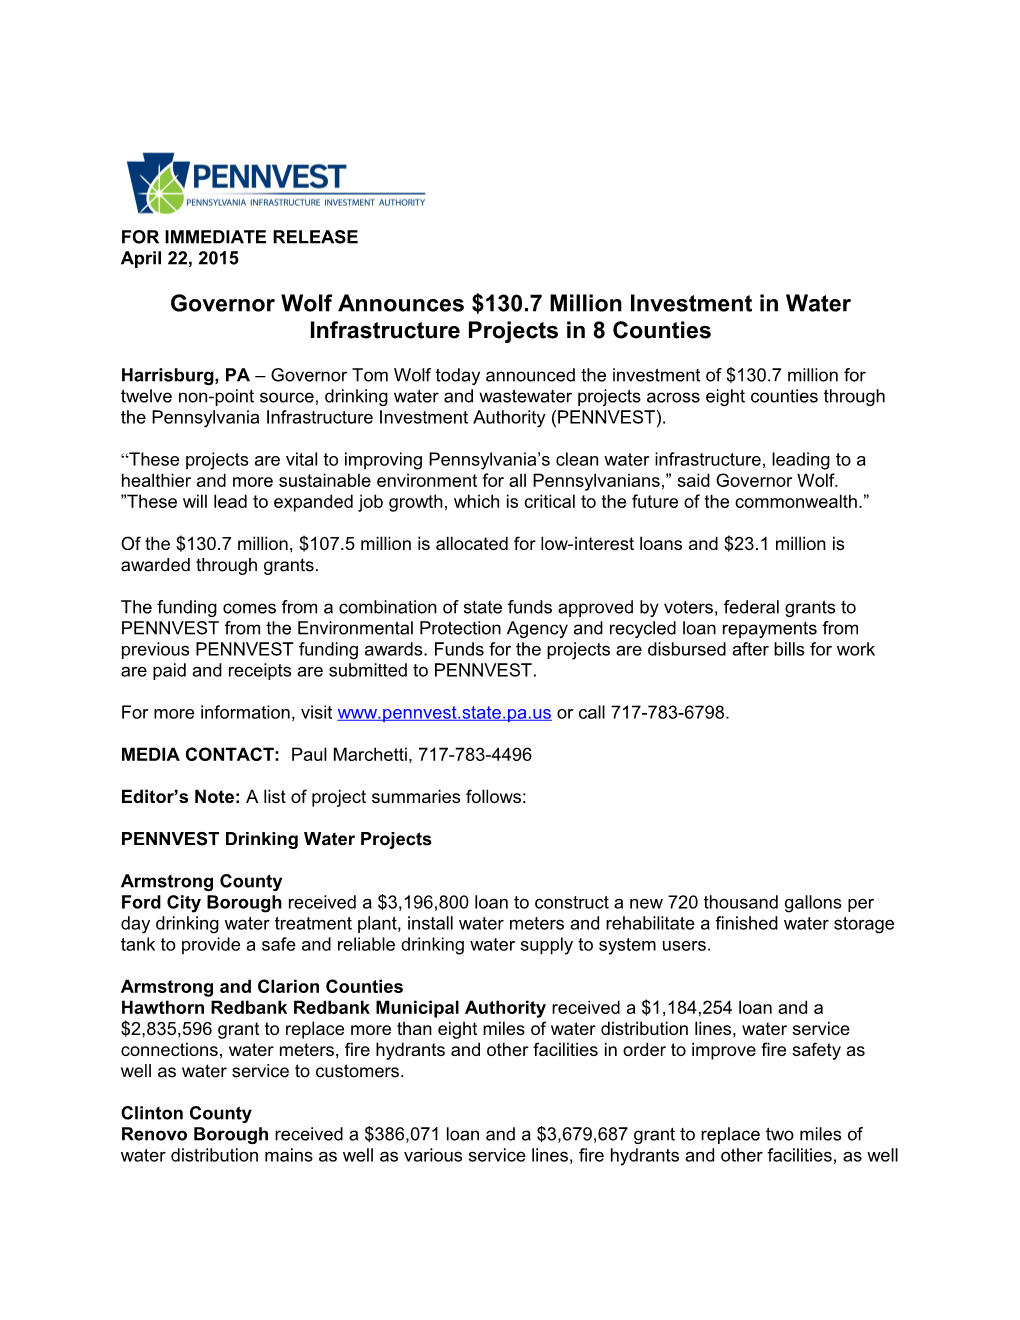 Governor Corbett Announces $130.7 Million Investment in Water Infrastructure Projects In